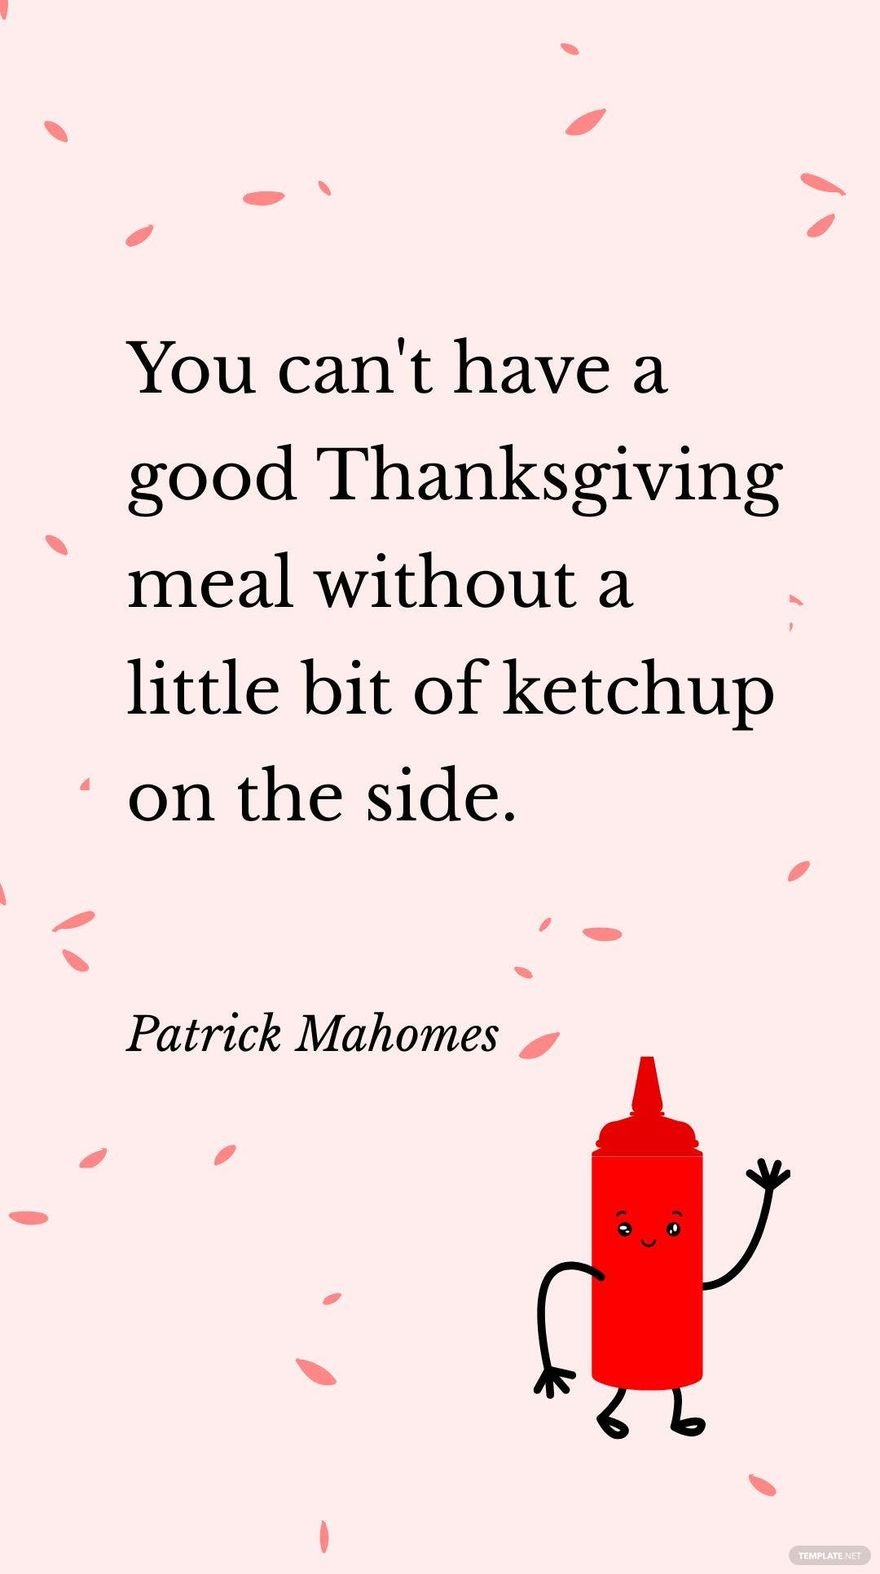 Patrick Mahomes - You can't have a good Thanksgiving meal without a little bit of ketchup on the side.